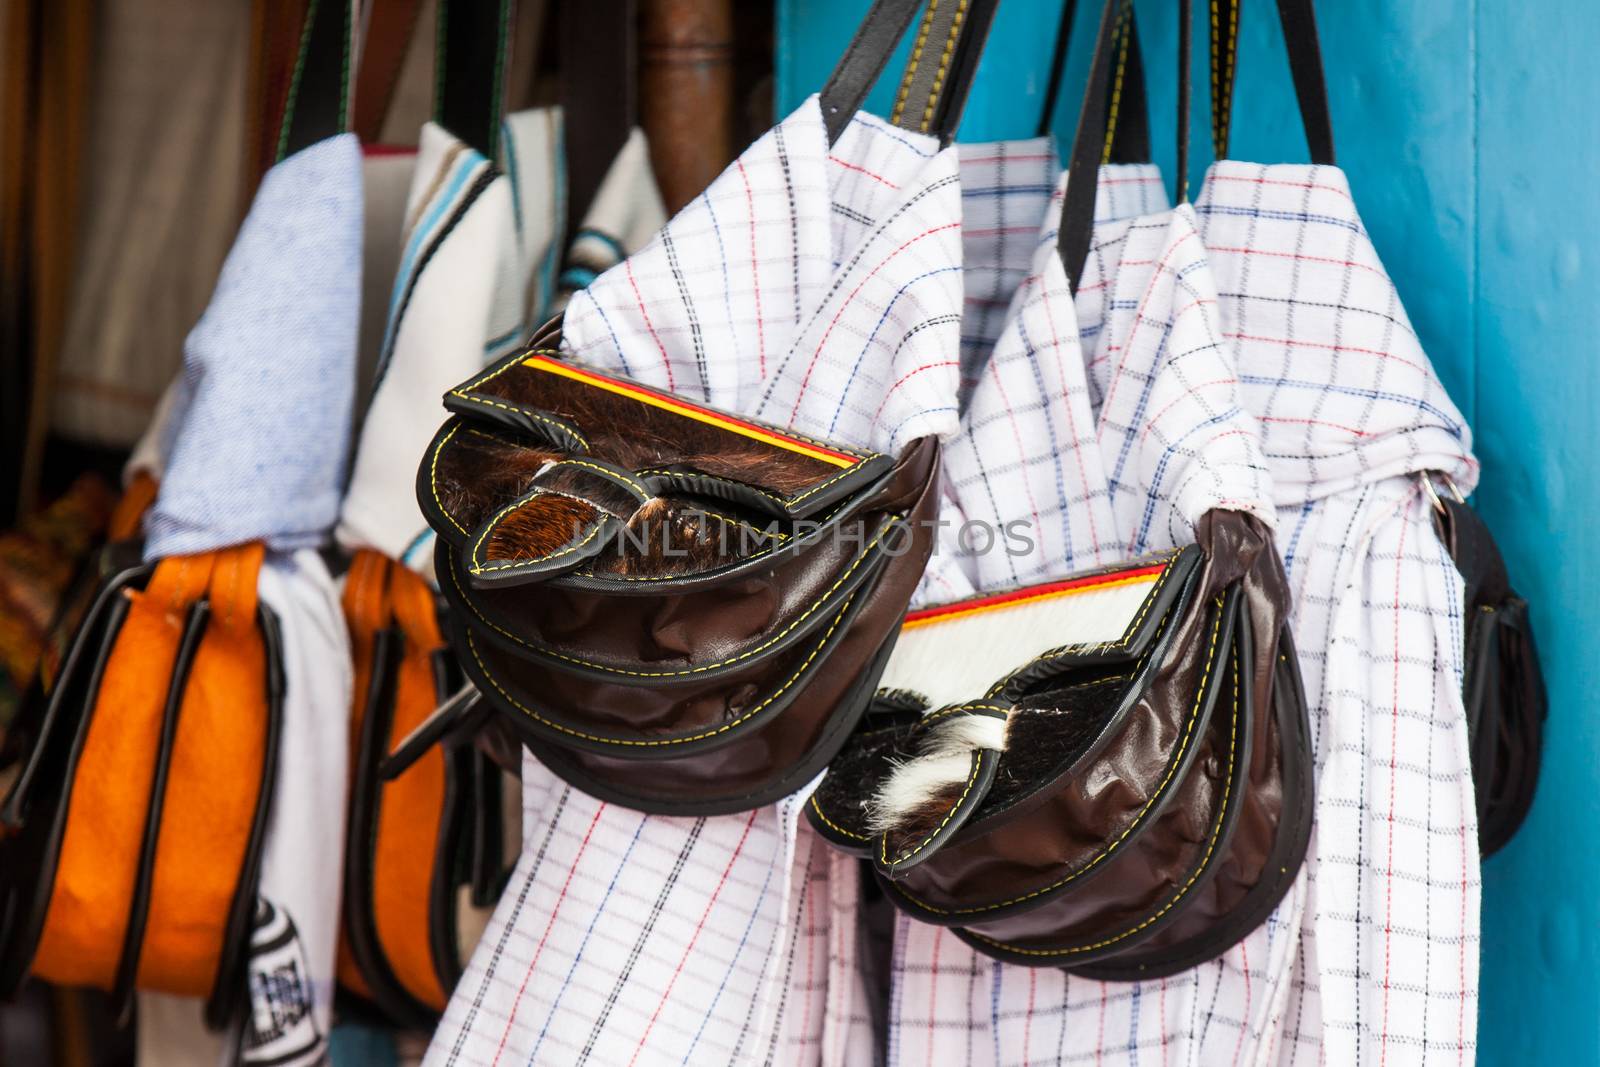 Colombian traditional leather satchel from the Antioquia Region called Carriel and poncho